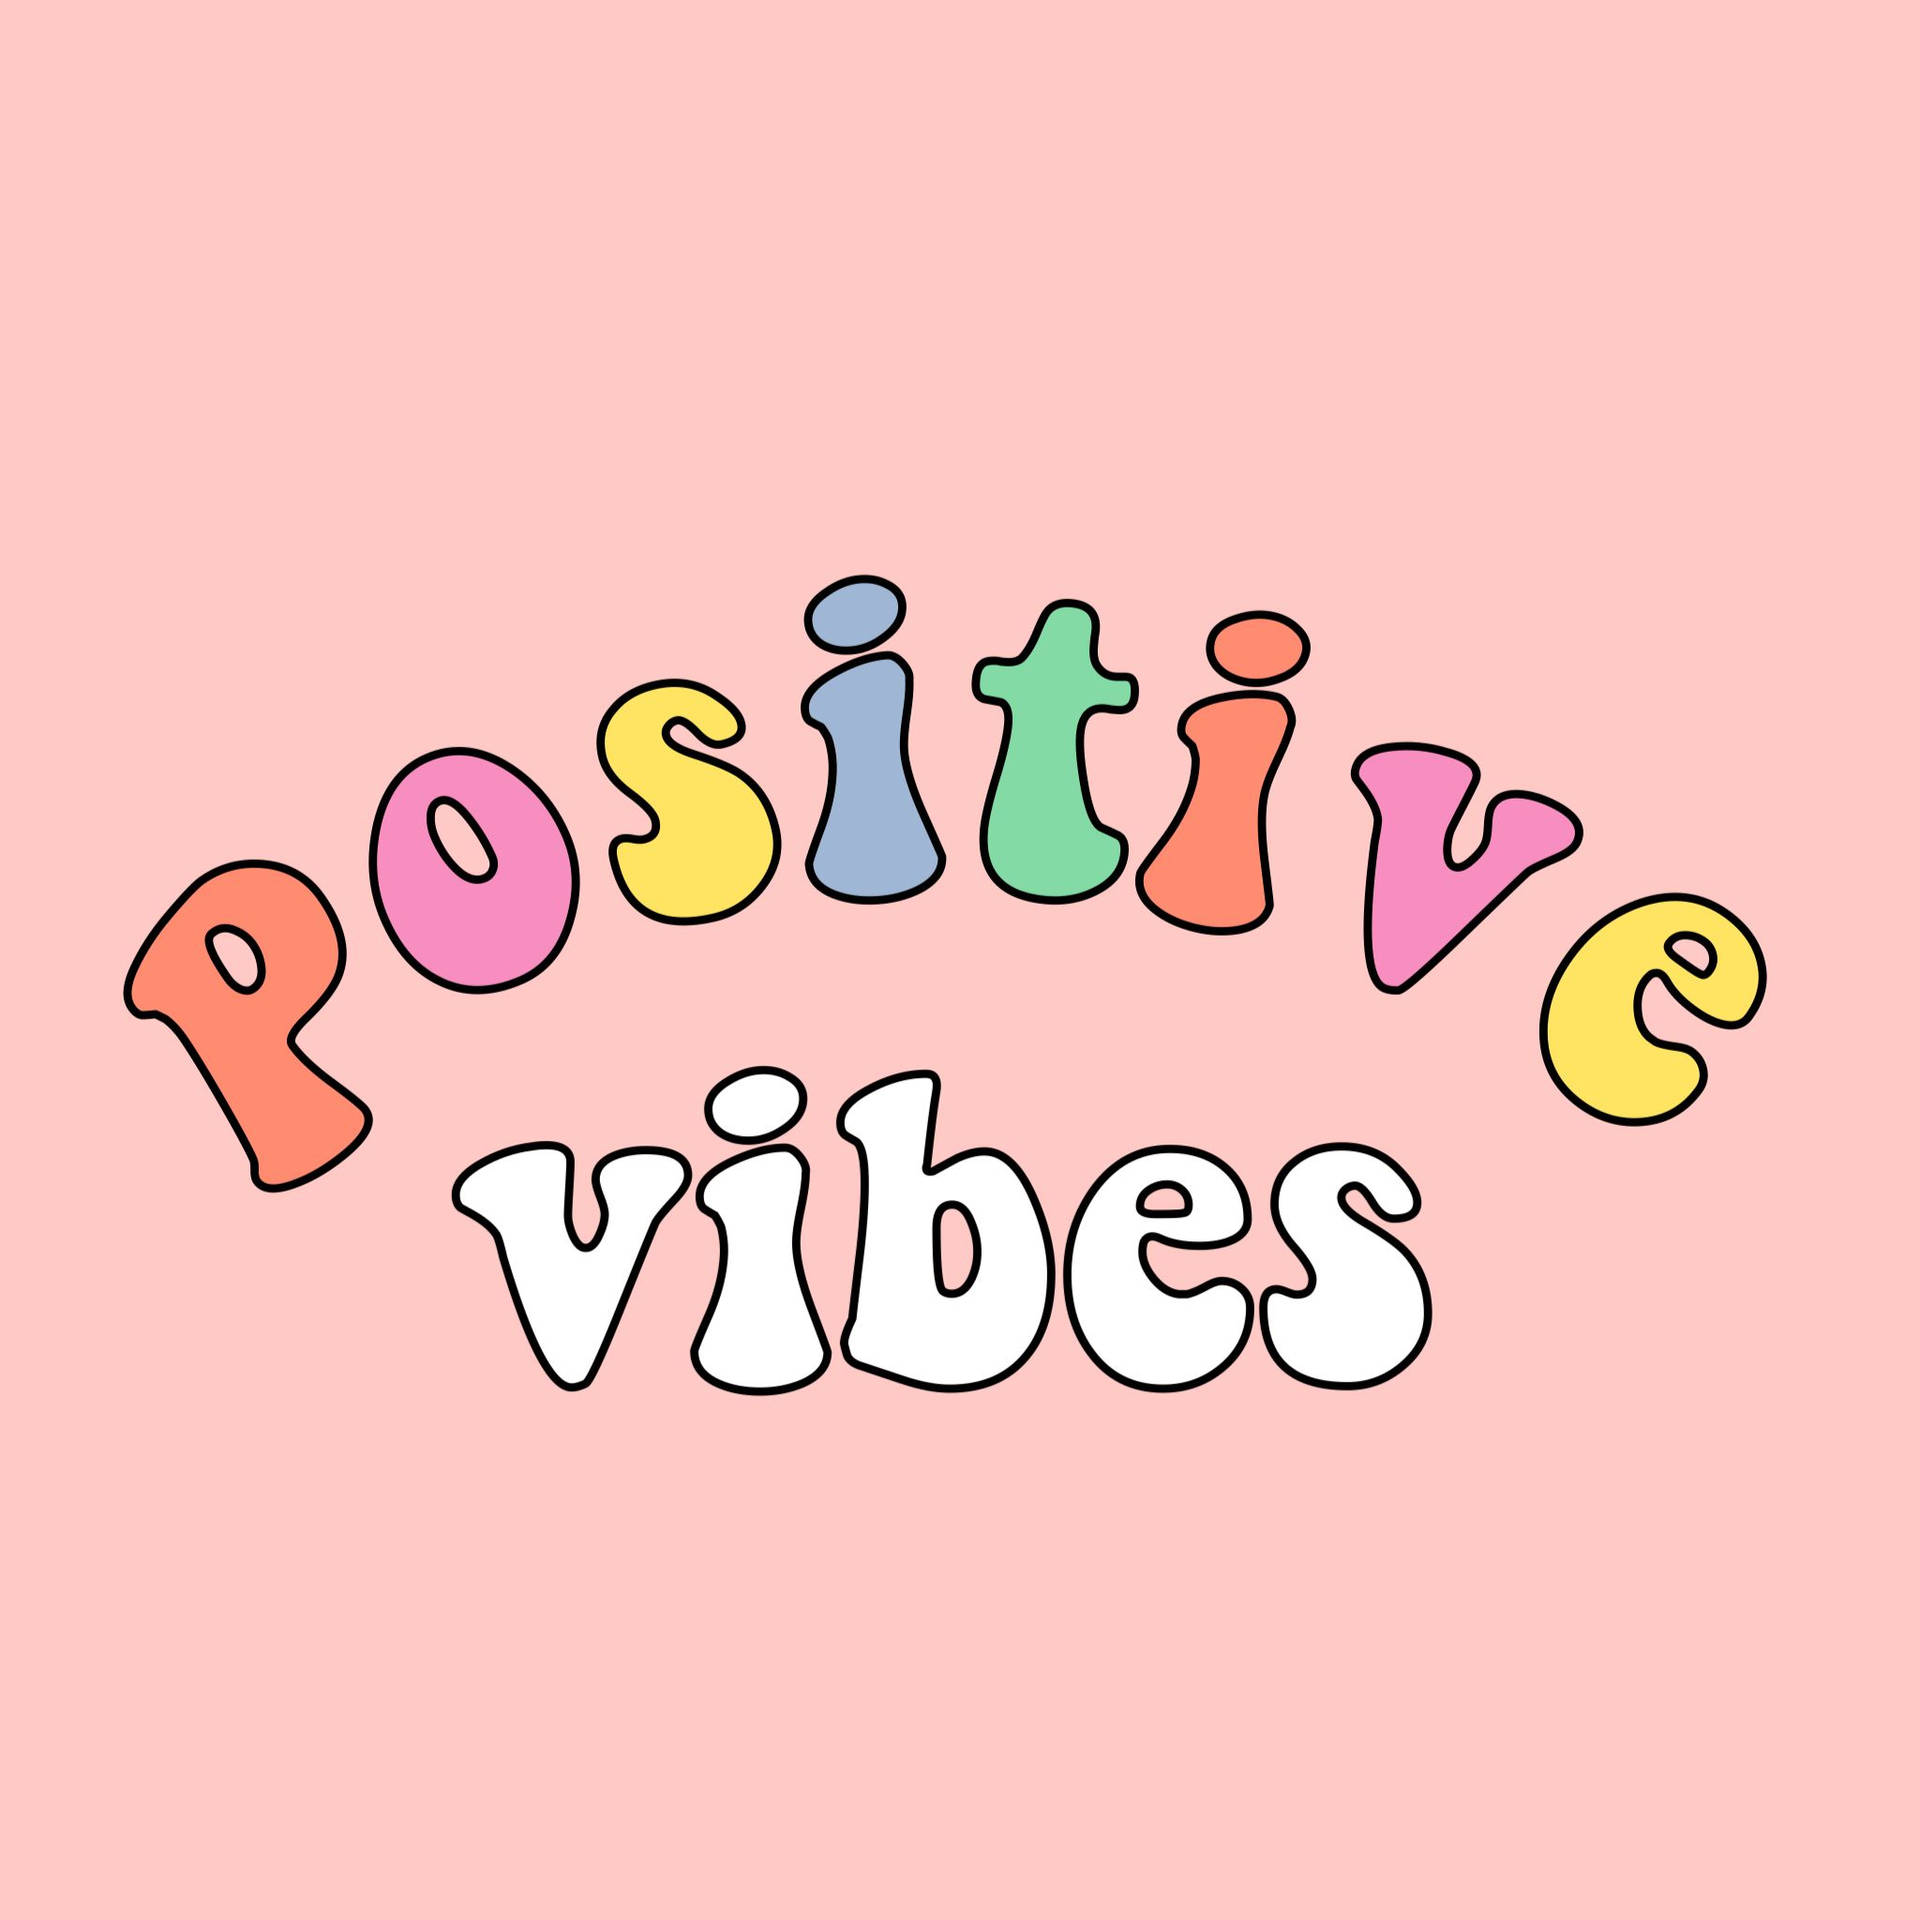 Download Aesthetic Vibes Positive Vibes Wallpaper